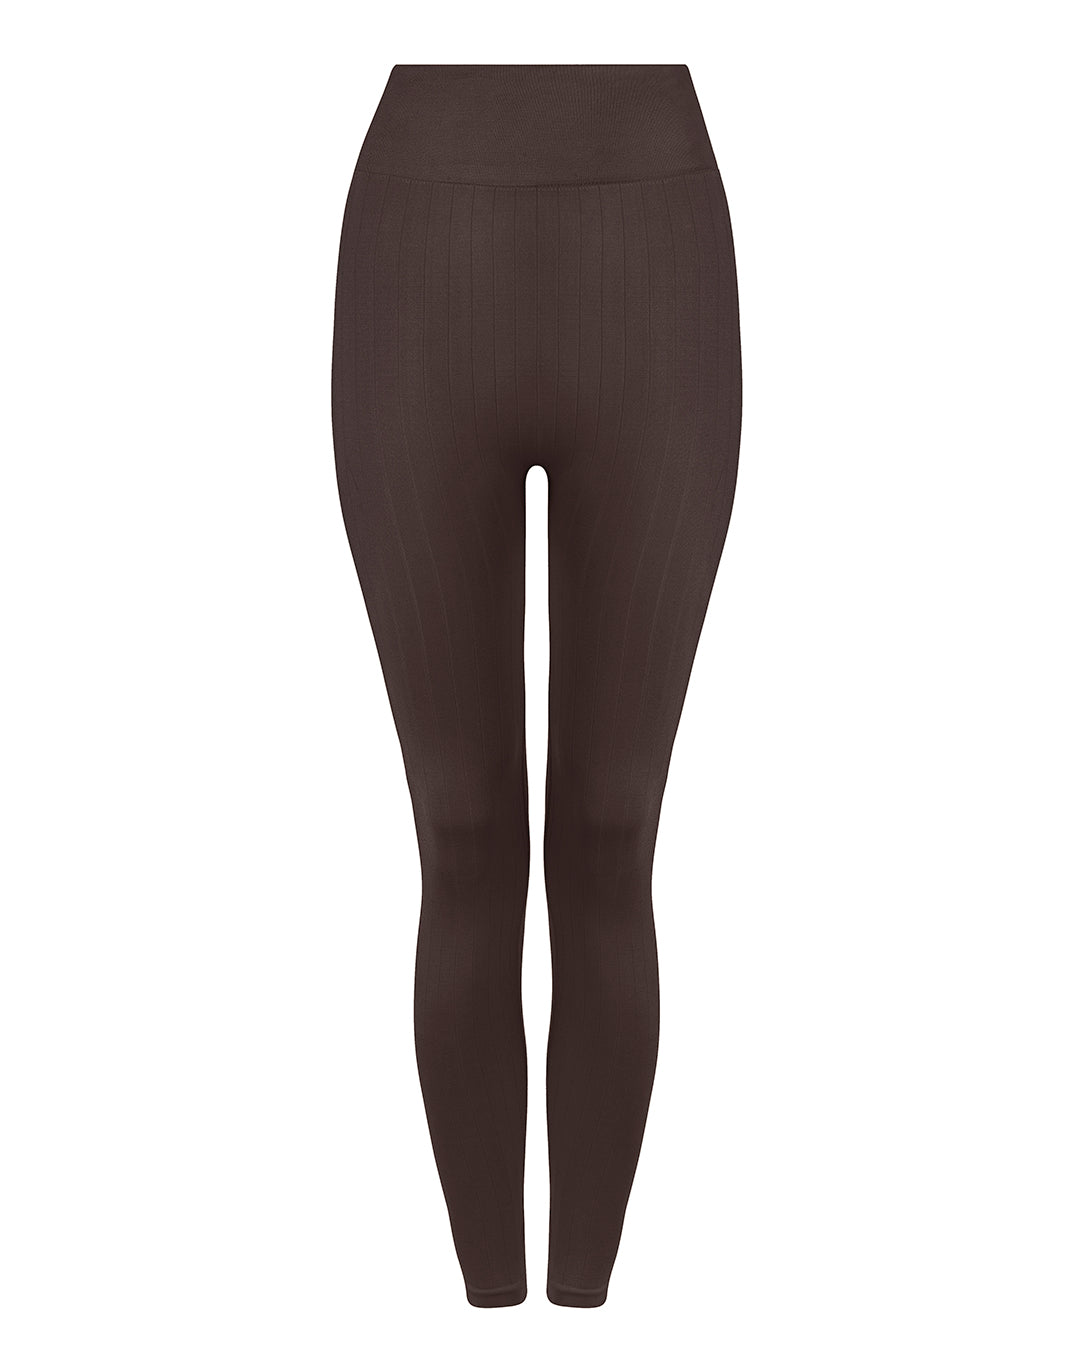 The Chocolate Leggings - Divaology